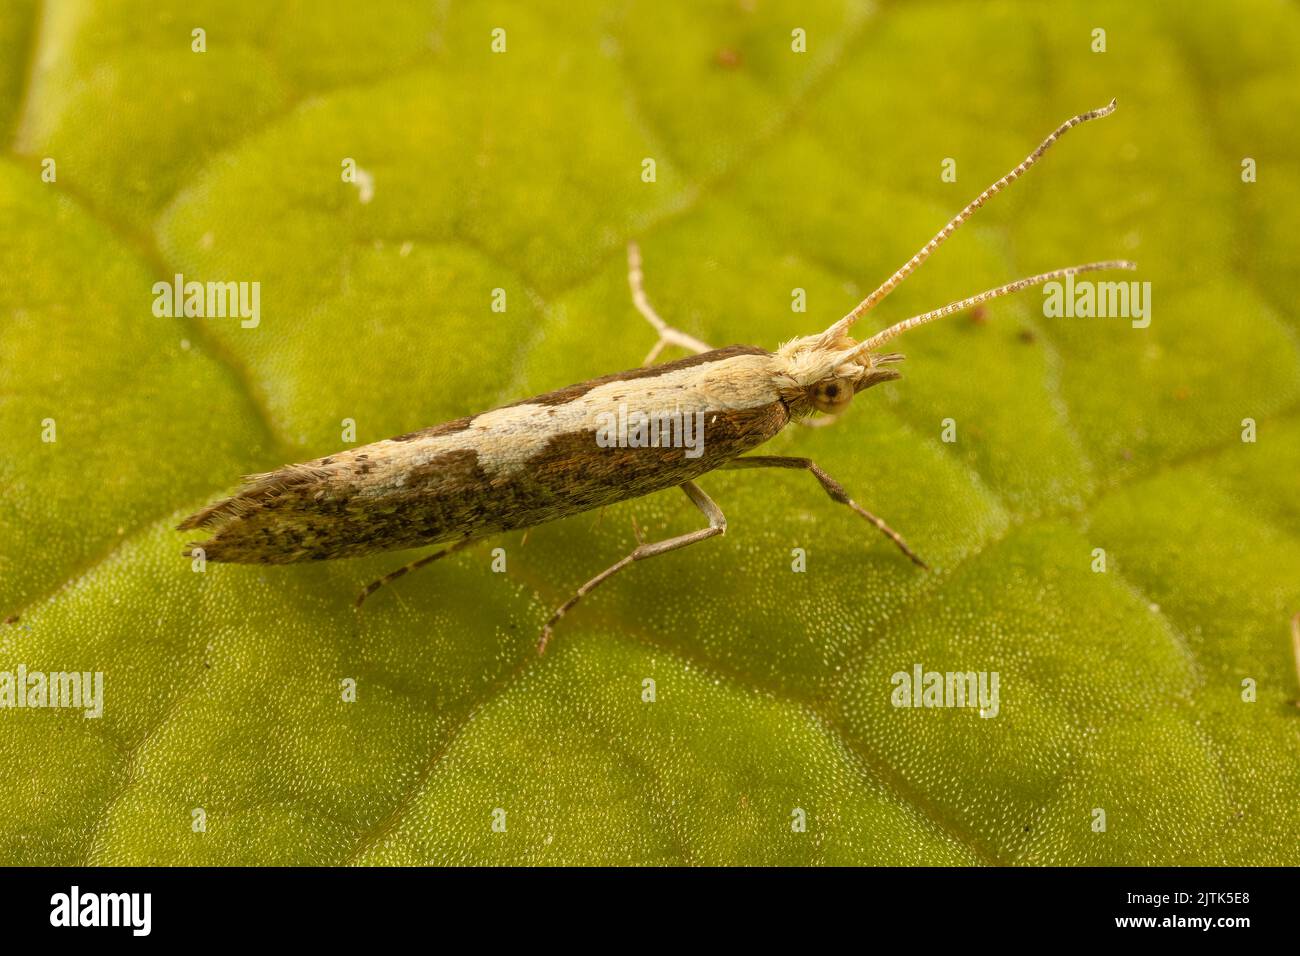 MDiamond-back moth, a commercial pest of cabbages, that can migrate large distances in great numbers and has developed pesticide resistance. Stock Photo